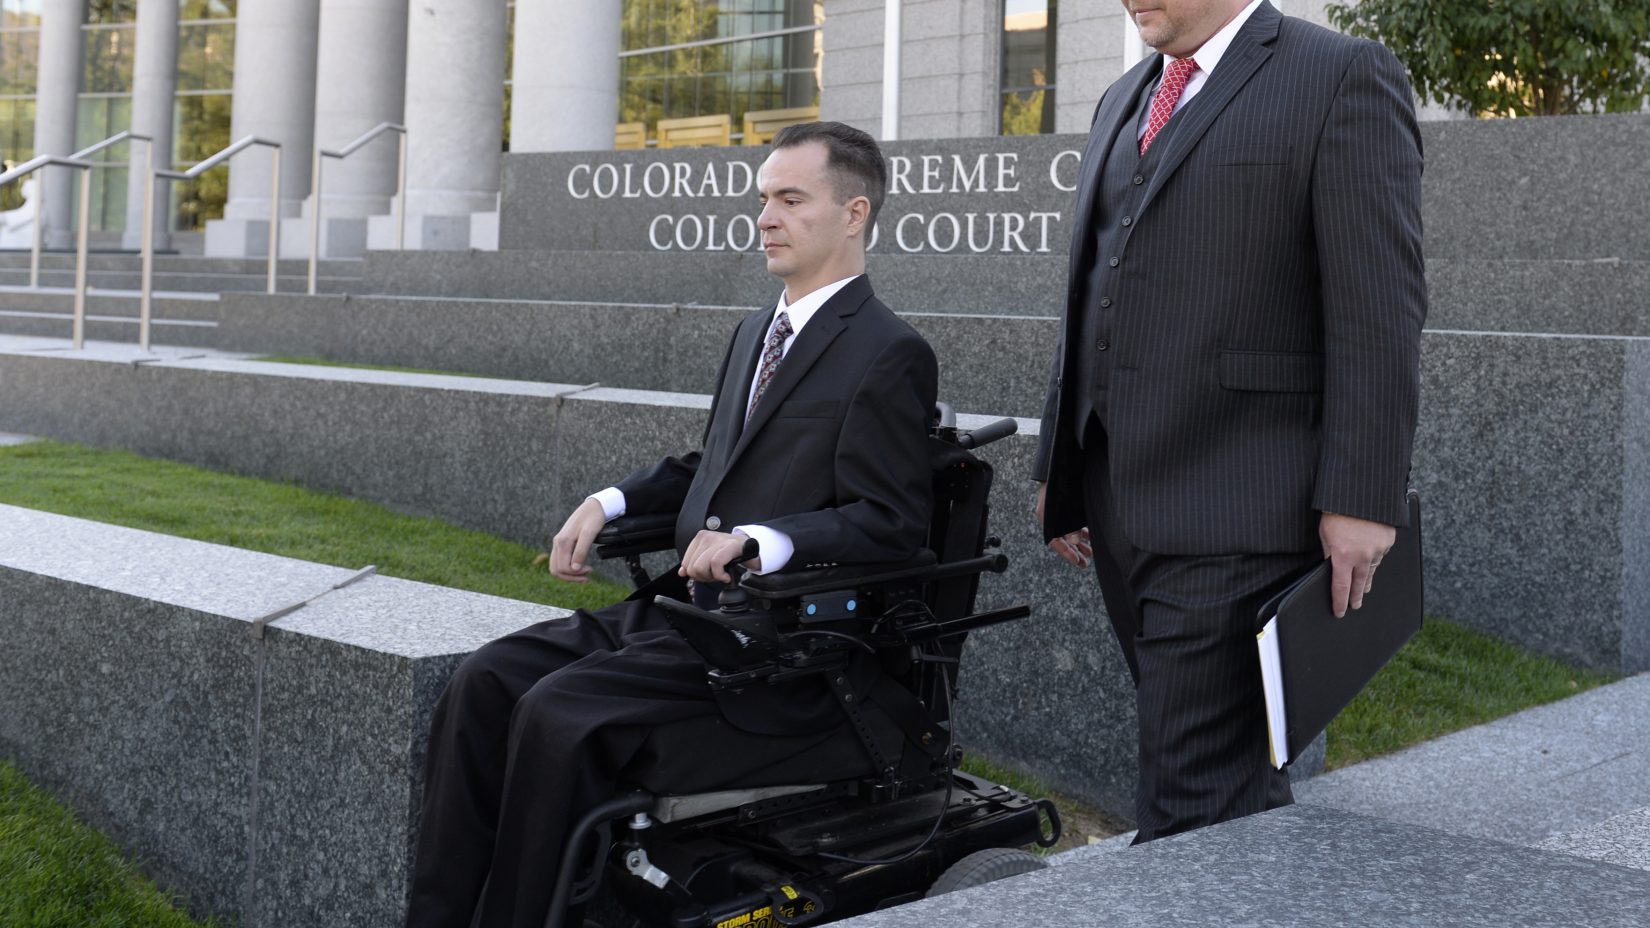 Brandon Coats leaves the courthouse at the end of the hearing with his attorney Michael Evans, right. (Kathryn Scott Osler, The Denver Post)